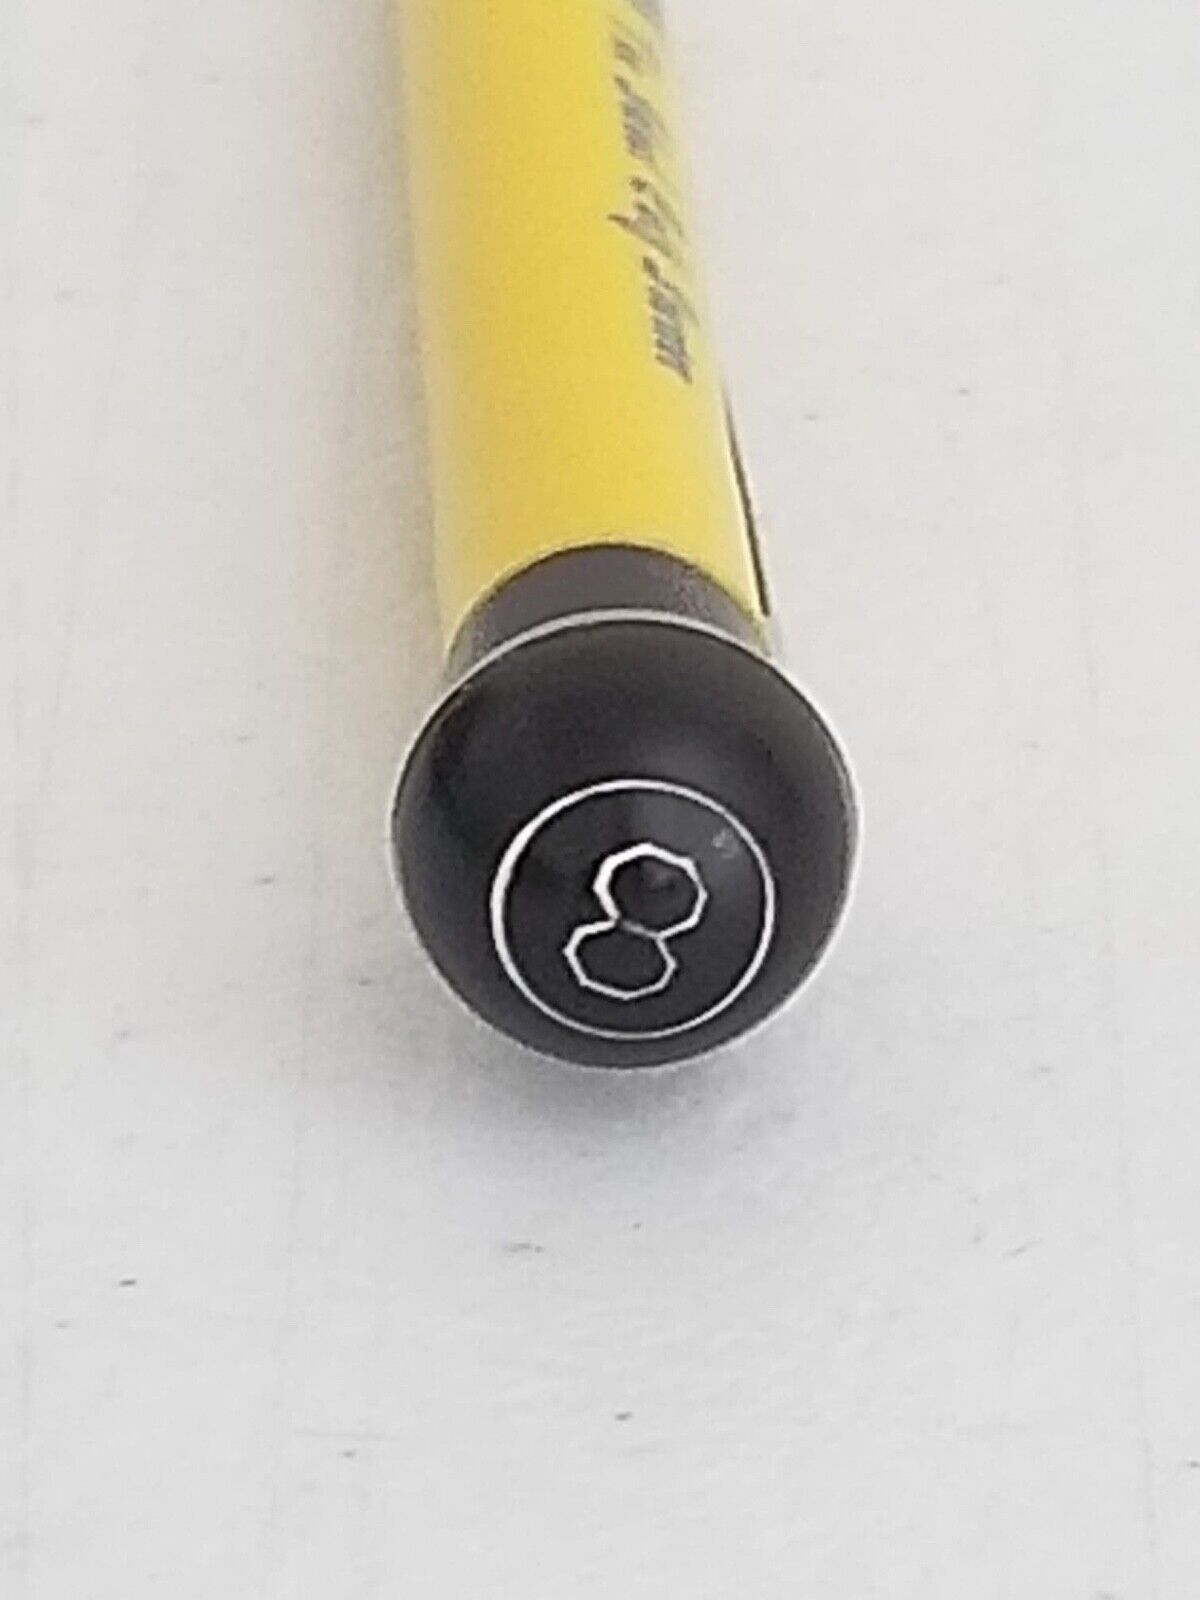 Vintage AutoPoint Mechanical Pencil with Calf Ween Advertising and Yellow 8 Ball Top Collectible - TreasuTiques